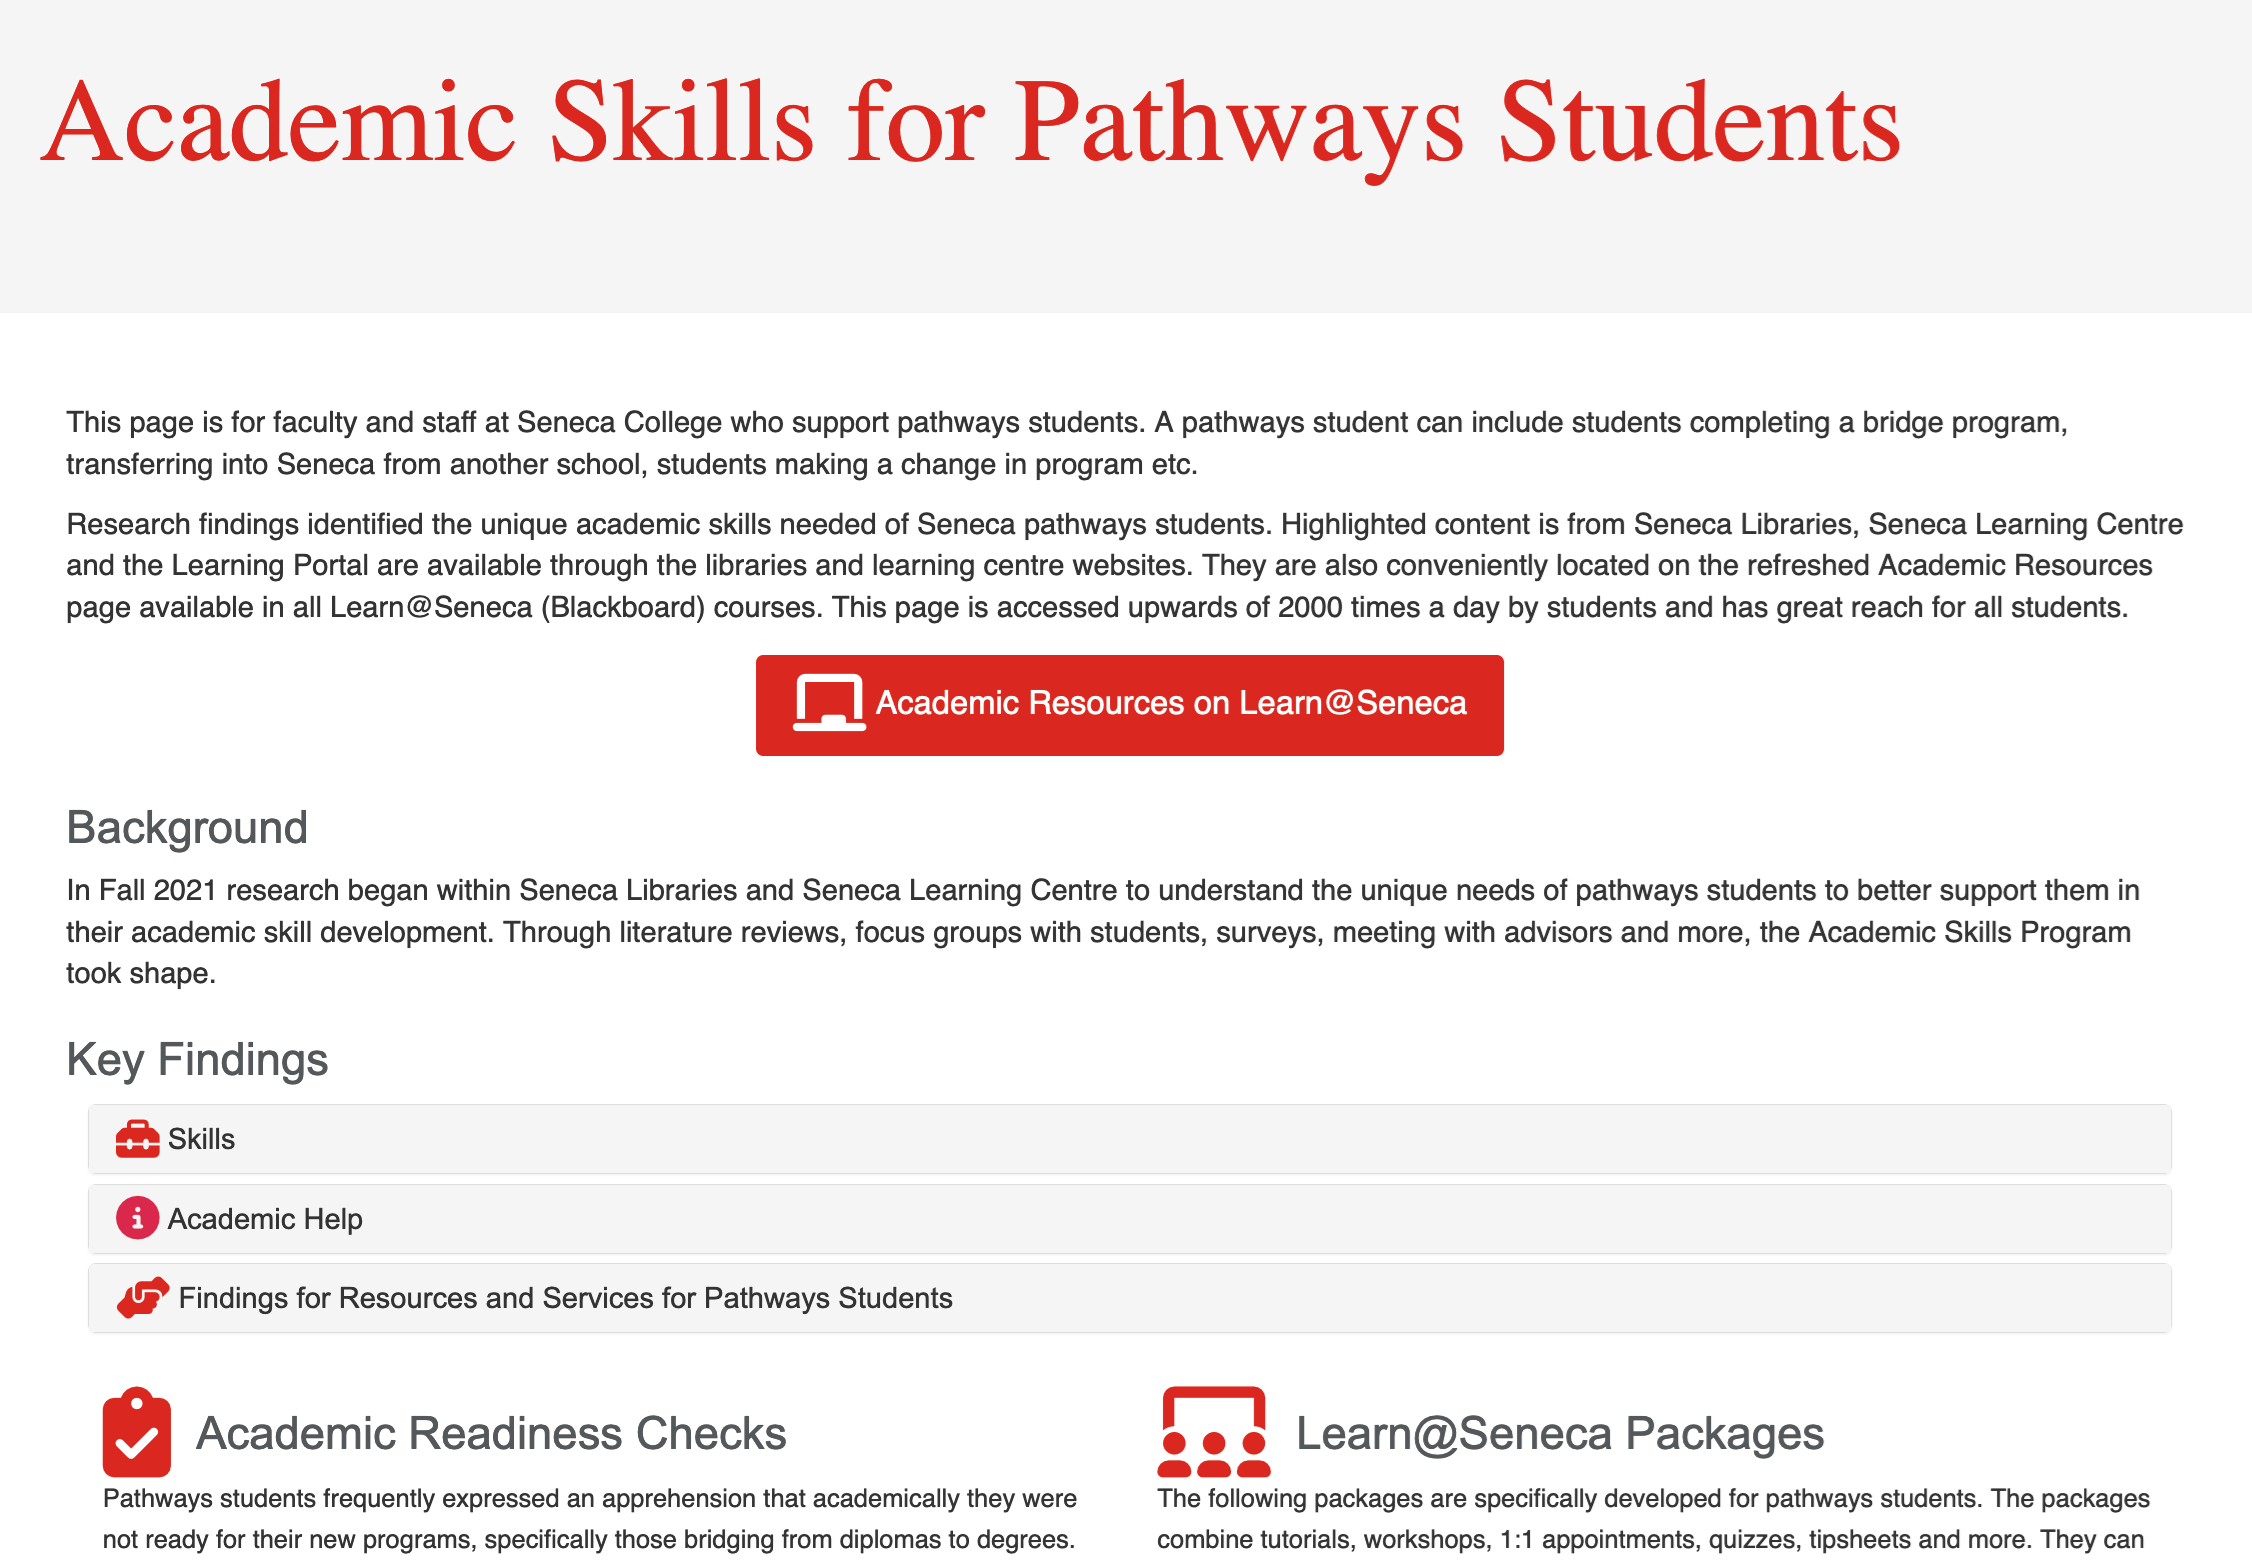 a screencapture from "Academic Skills for Pathways Students," a quick-gude page for faculty and staff at Seneca Polytechnic who support pathways students